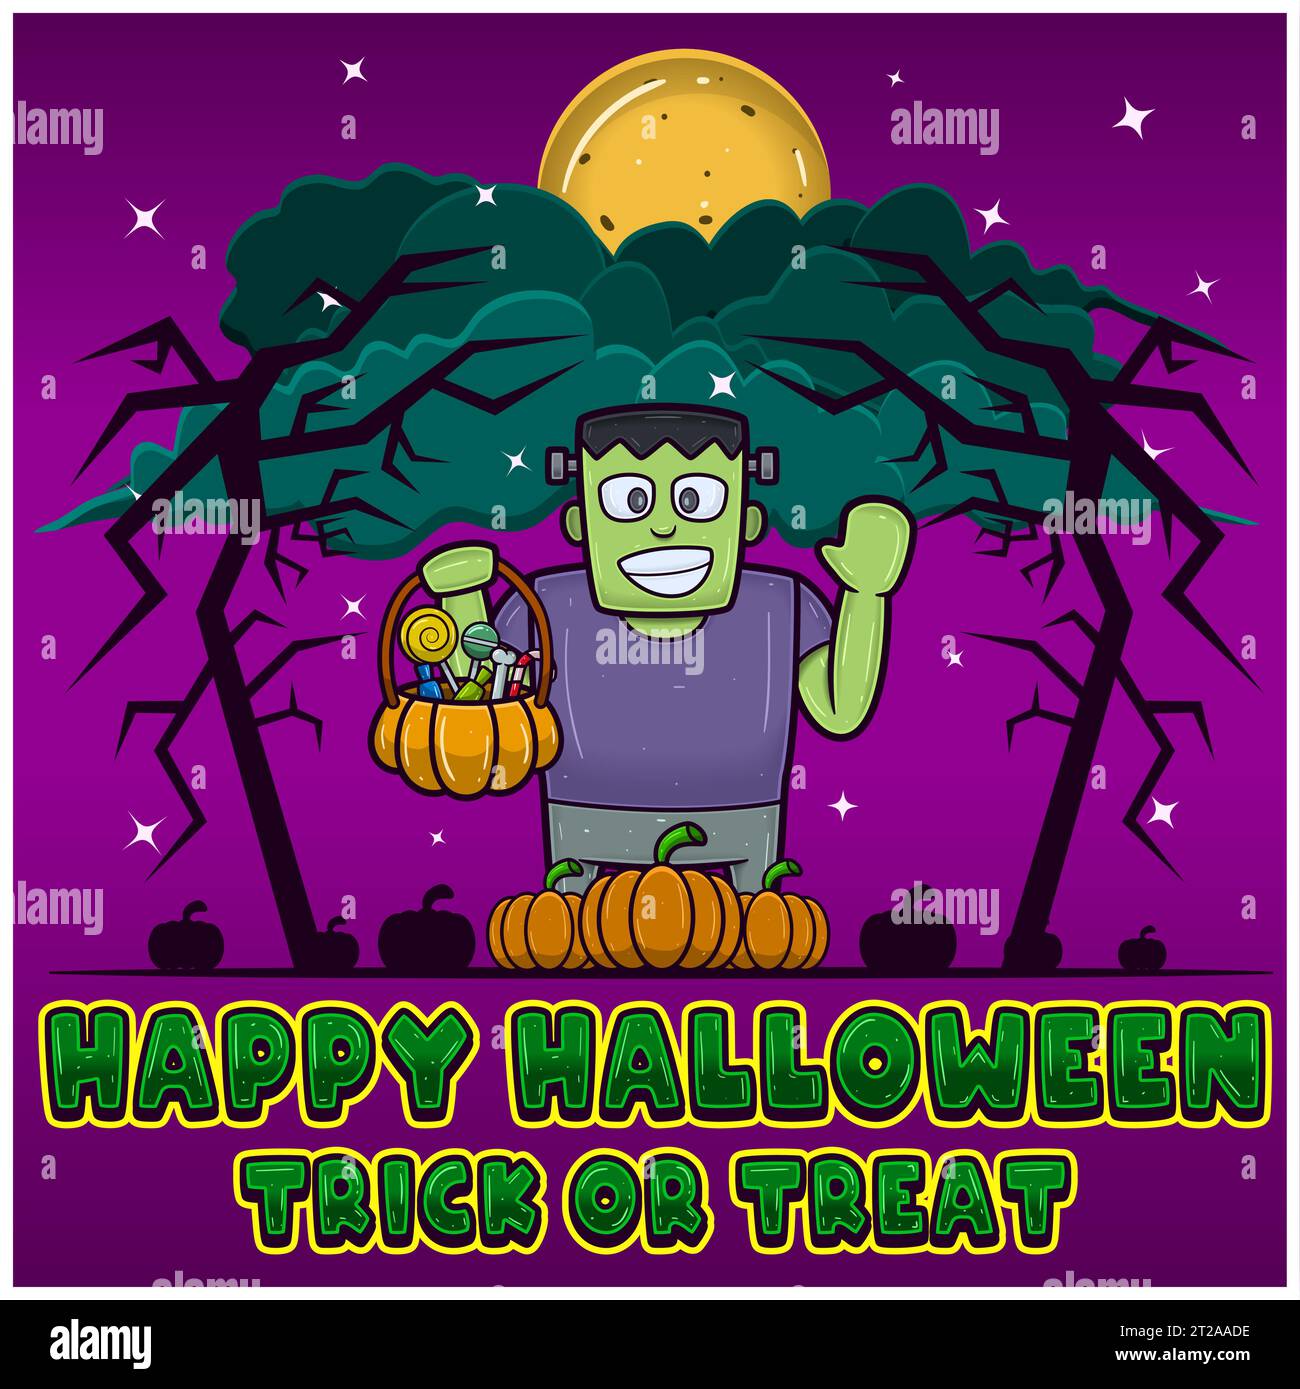 Green Zombie Holding Candy. Happy Halloween. Trick or Treat. Greeting Card, Invitation and Poster. Vectors and Illustrations. Stock Vector